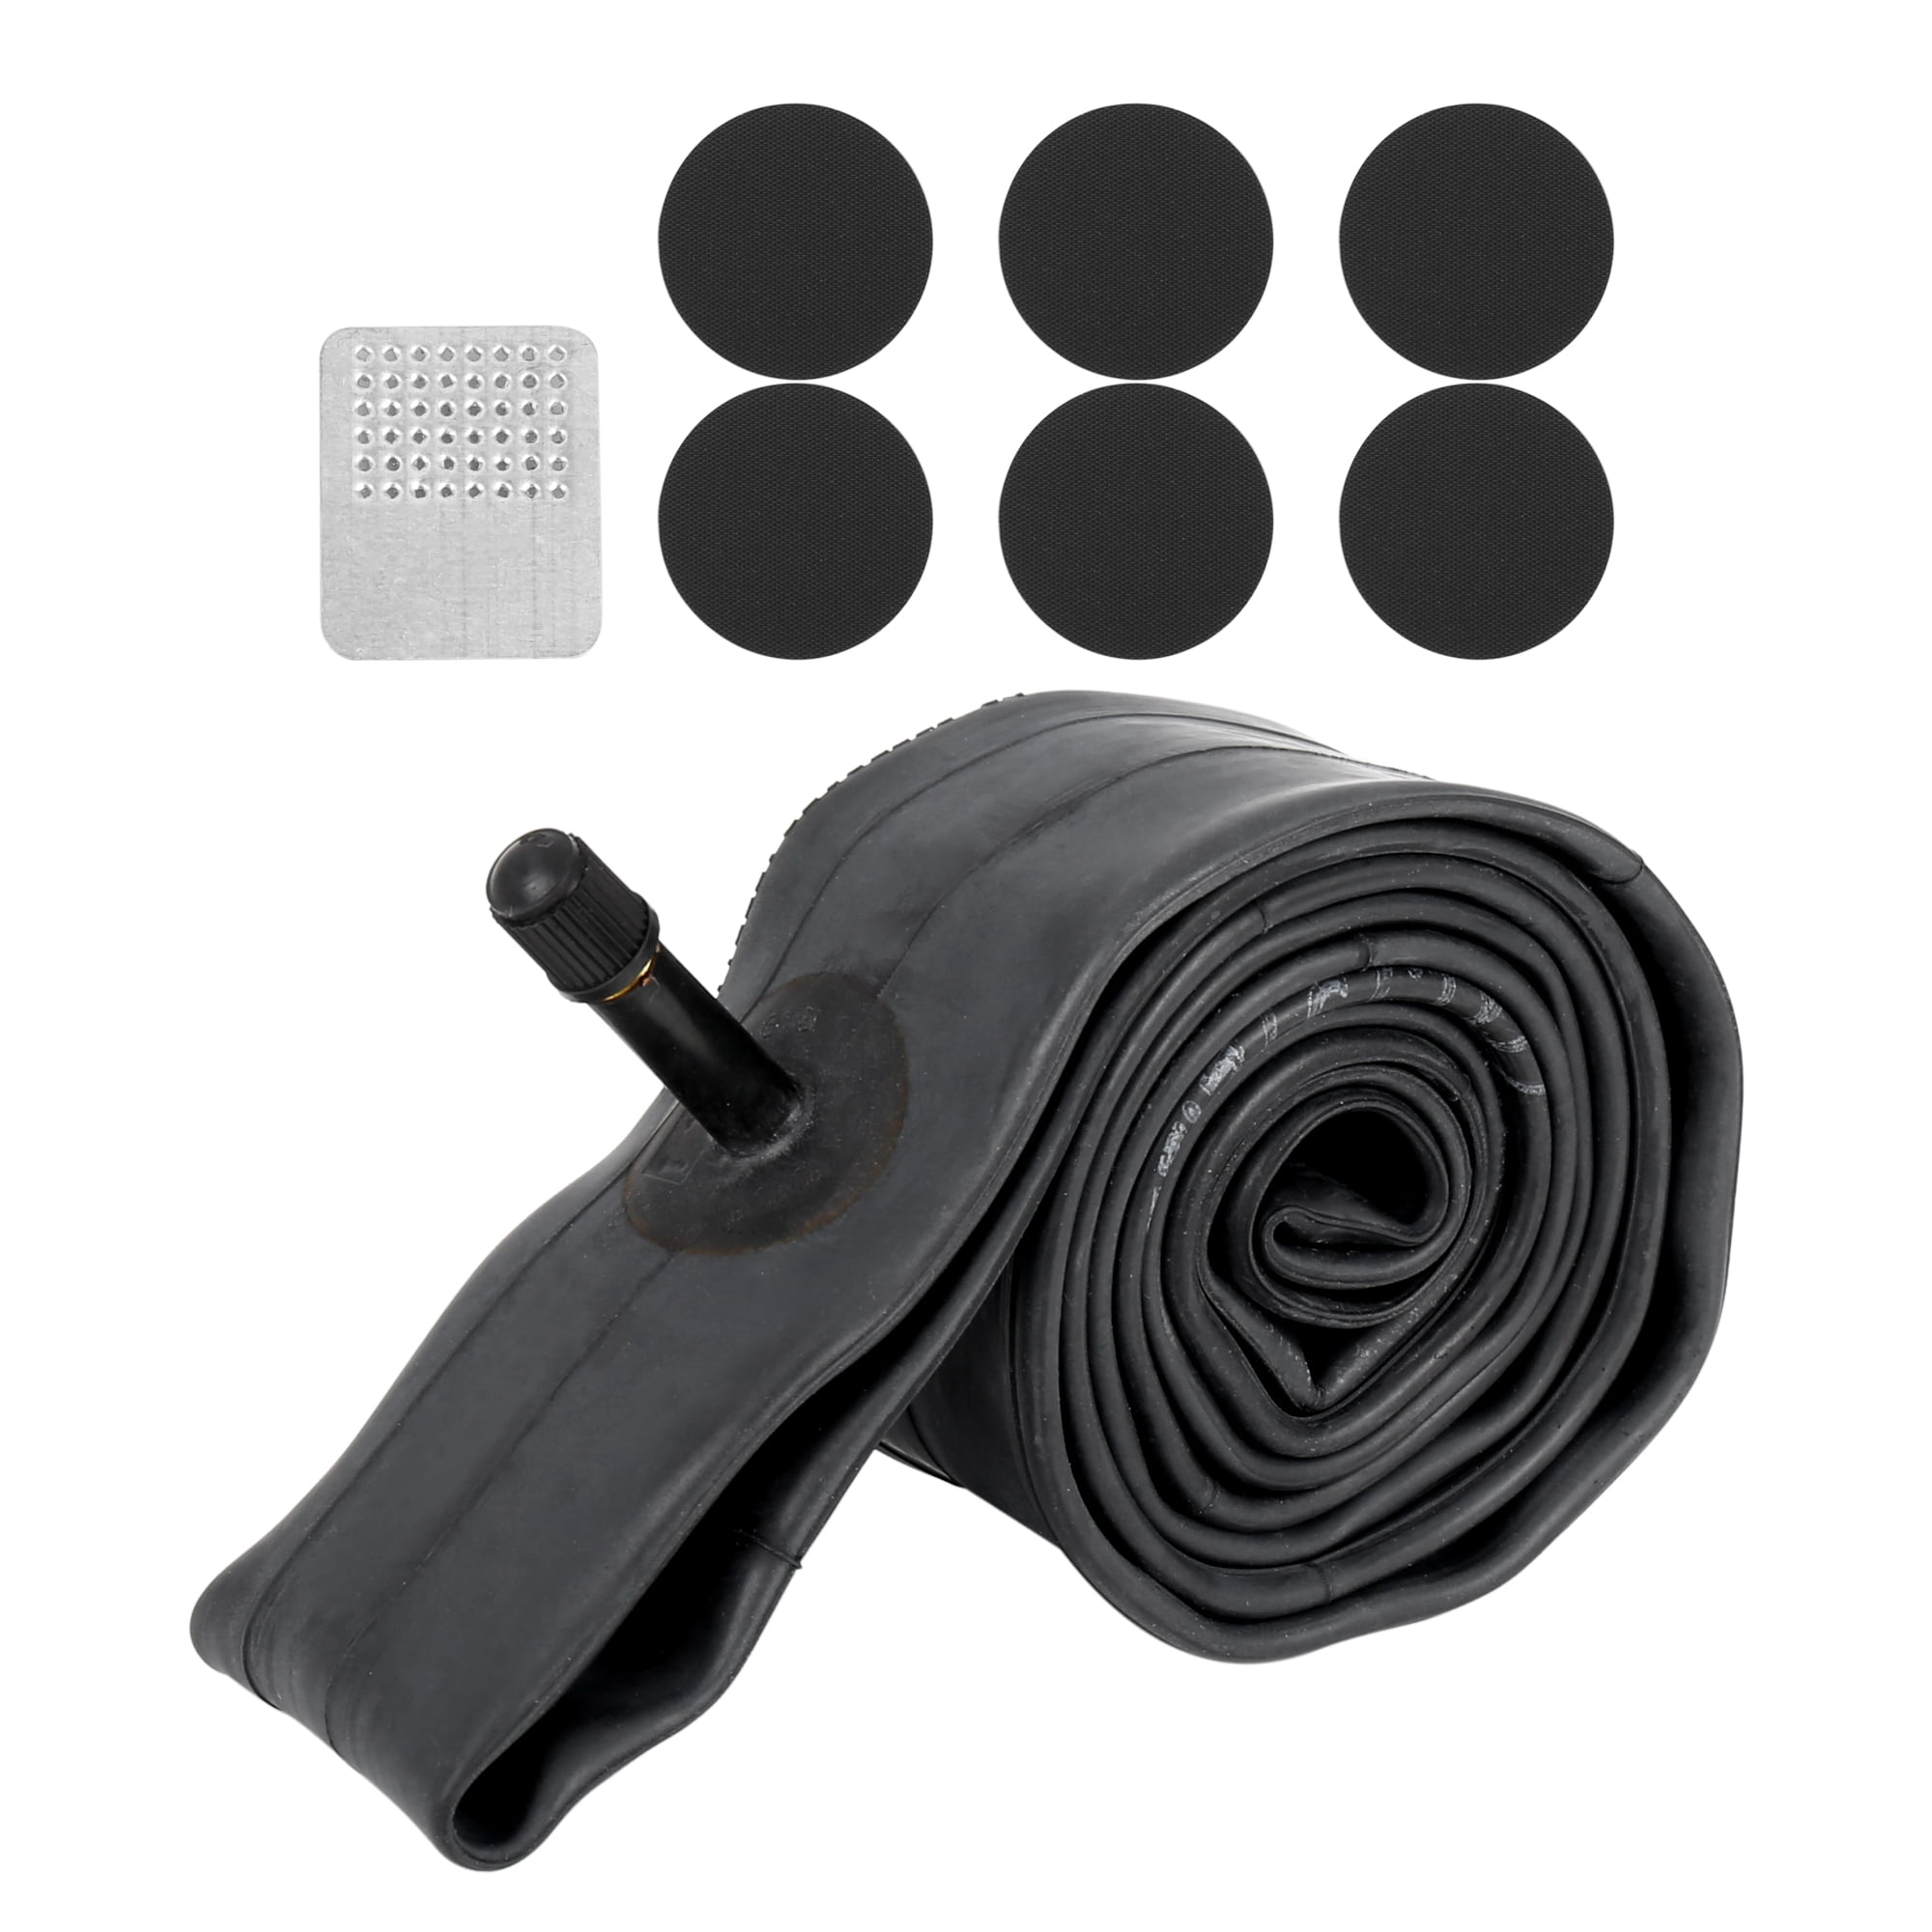 Details about   2 Pack 22’ x 1.75/2 125 Inner Tubes with Tire Leveler and Round Patches for Bike 